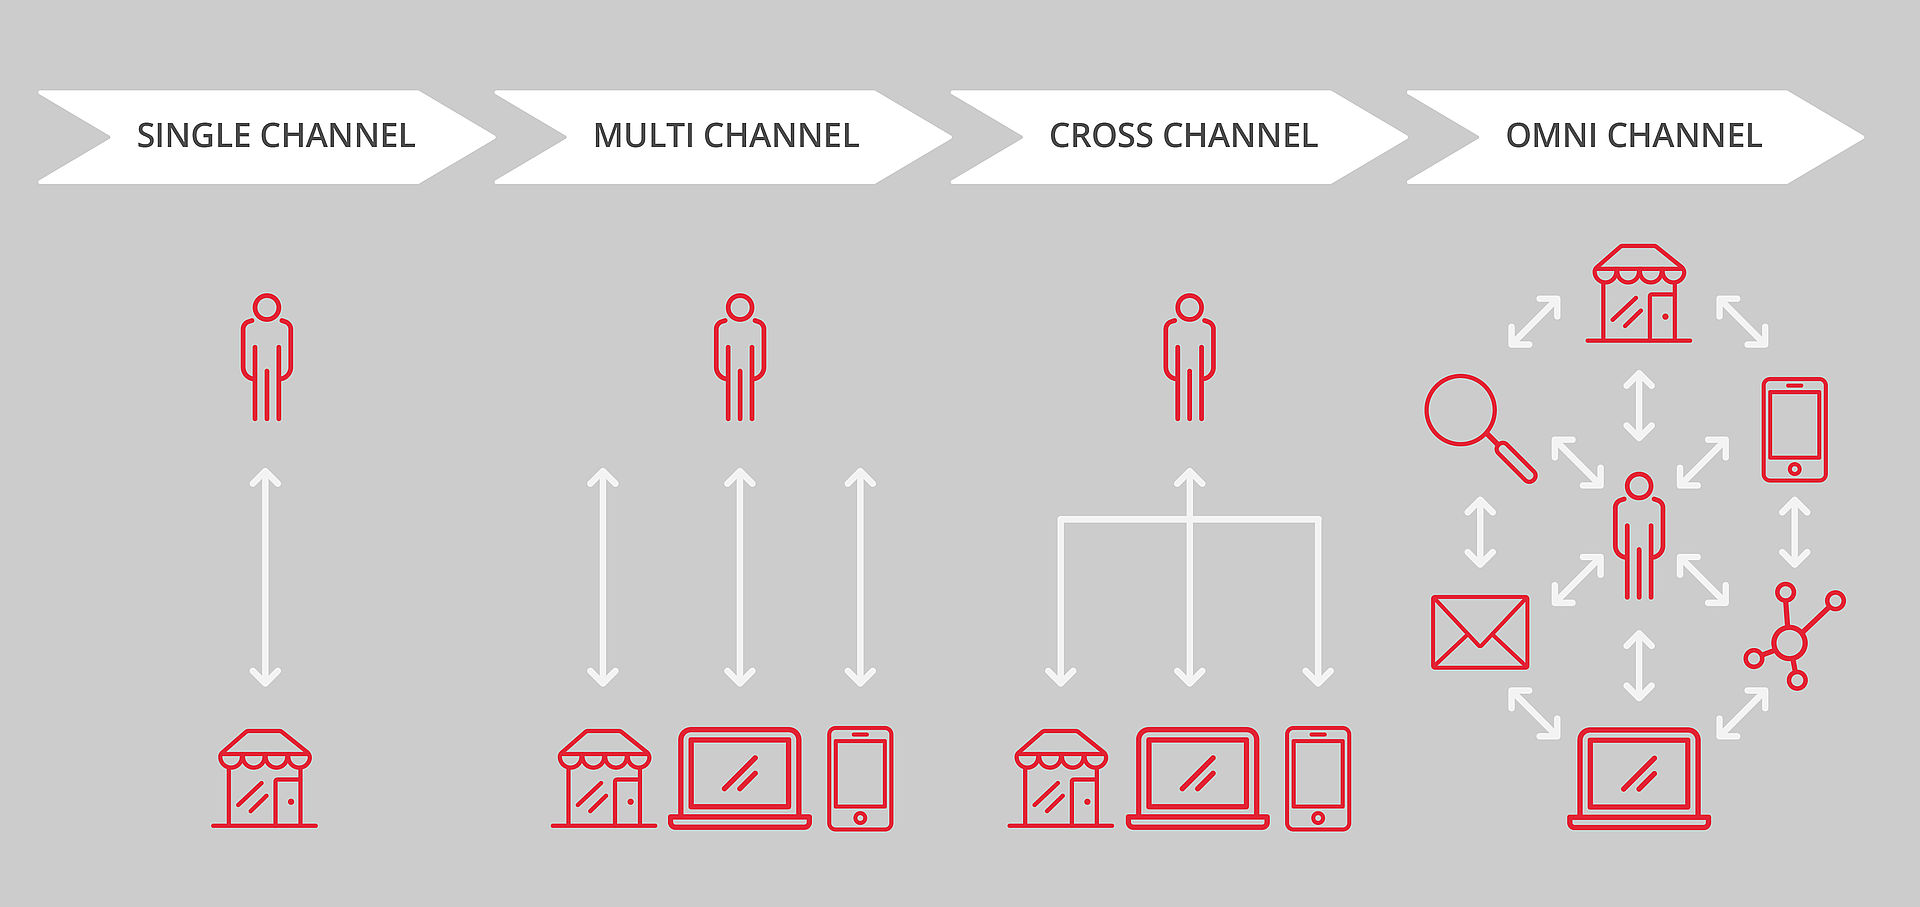 Graph showing channel interactions between business and customer